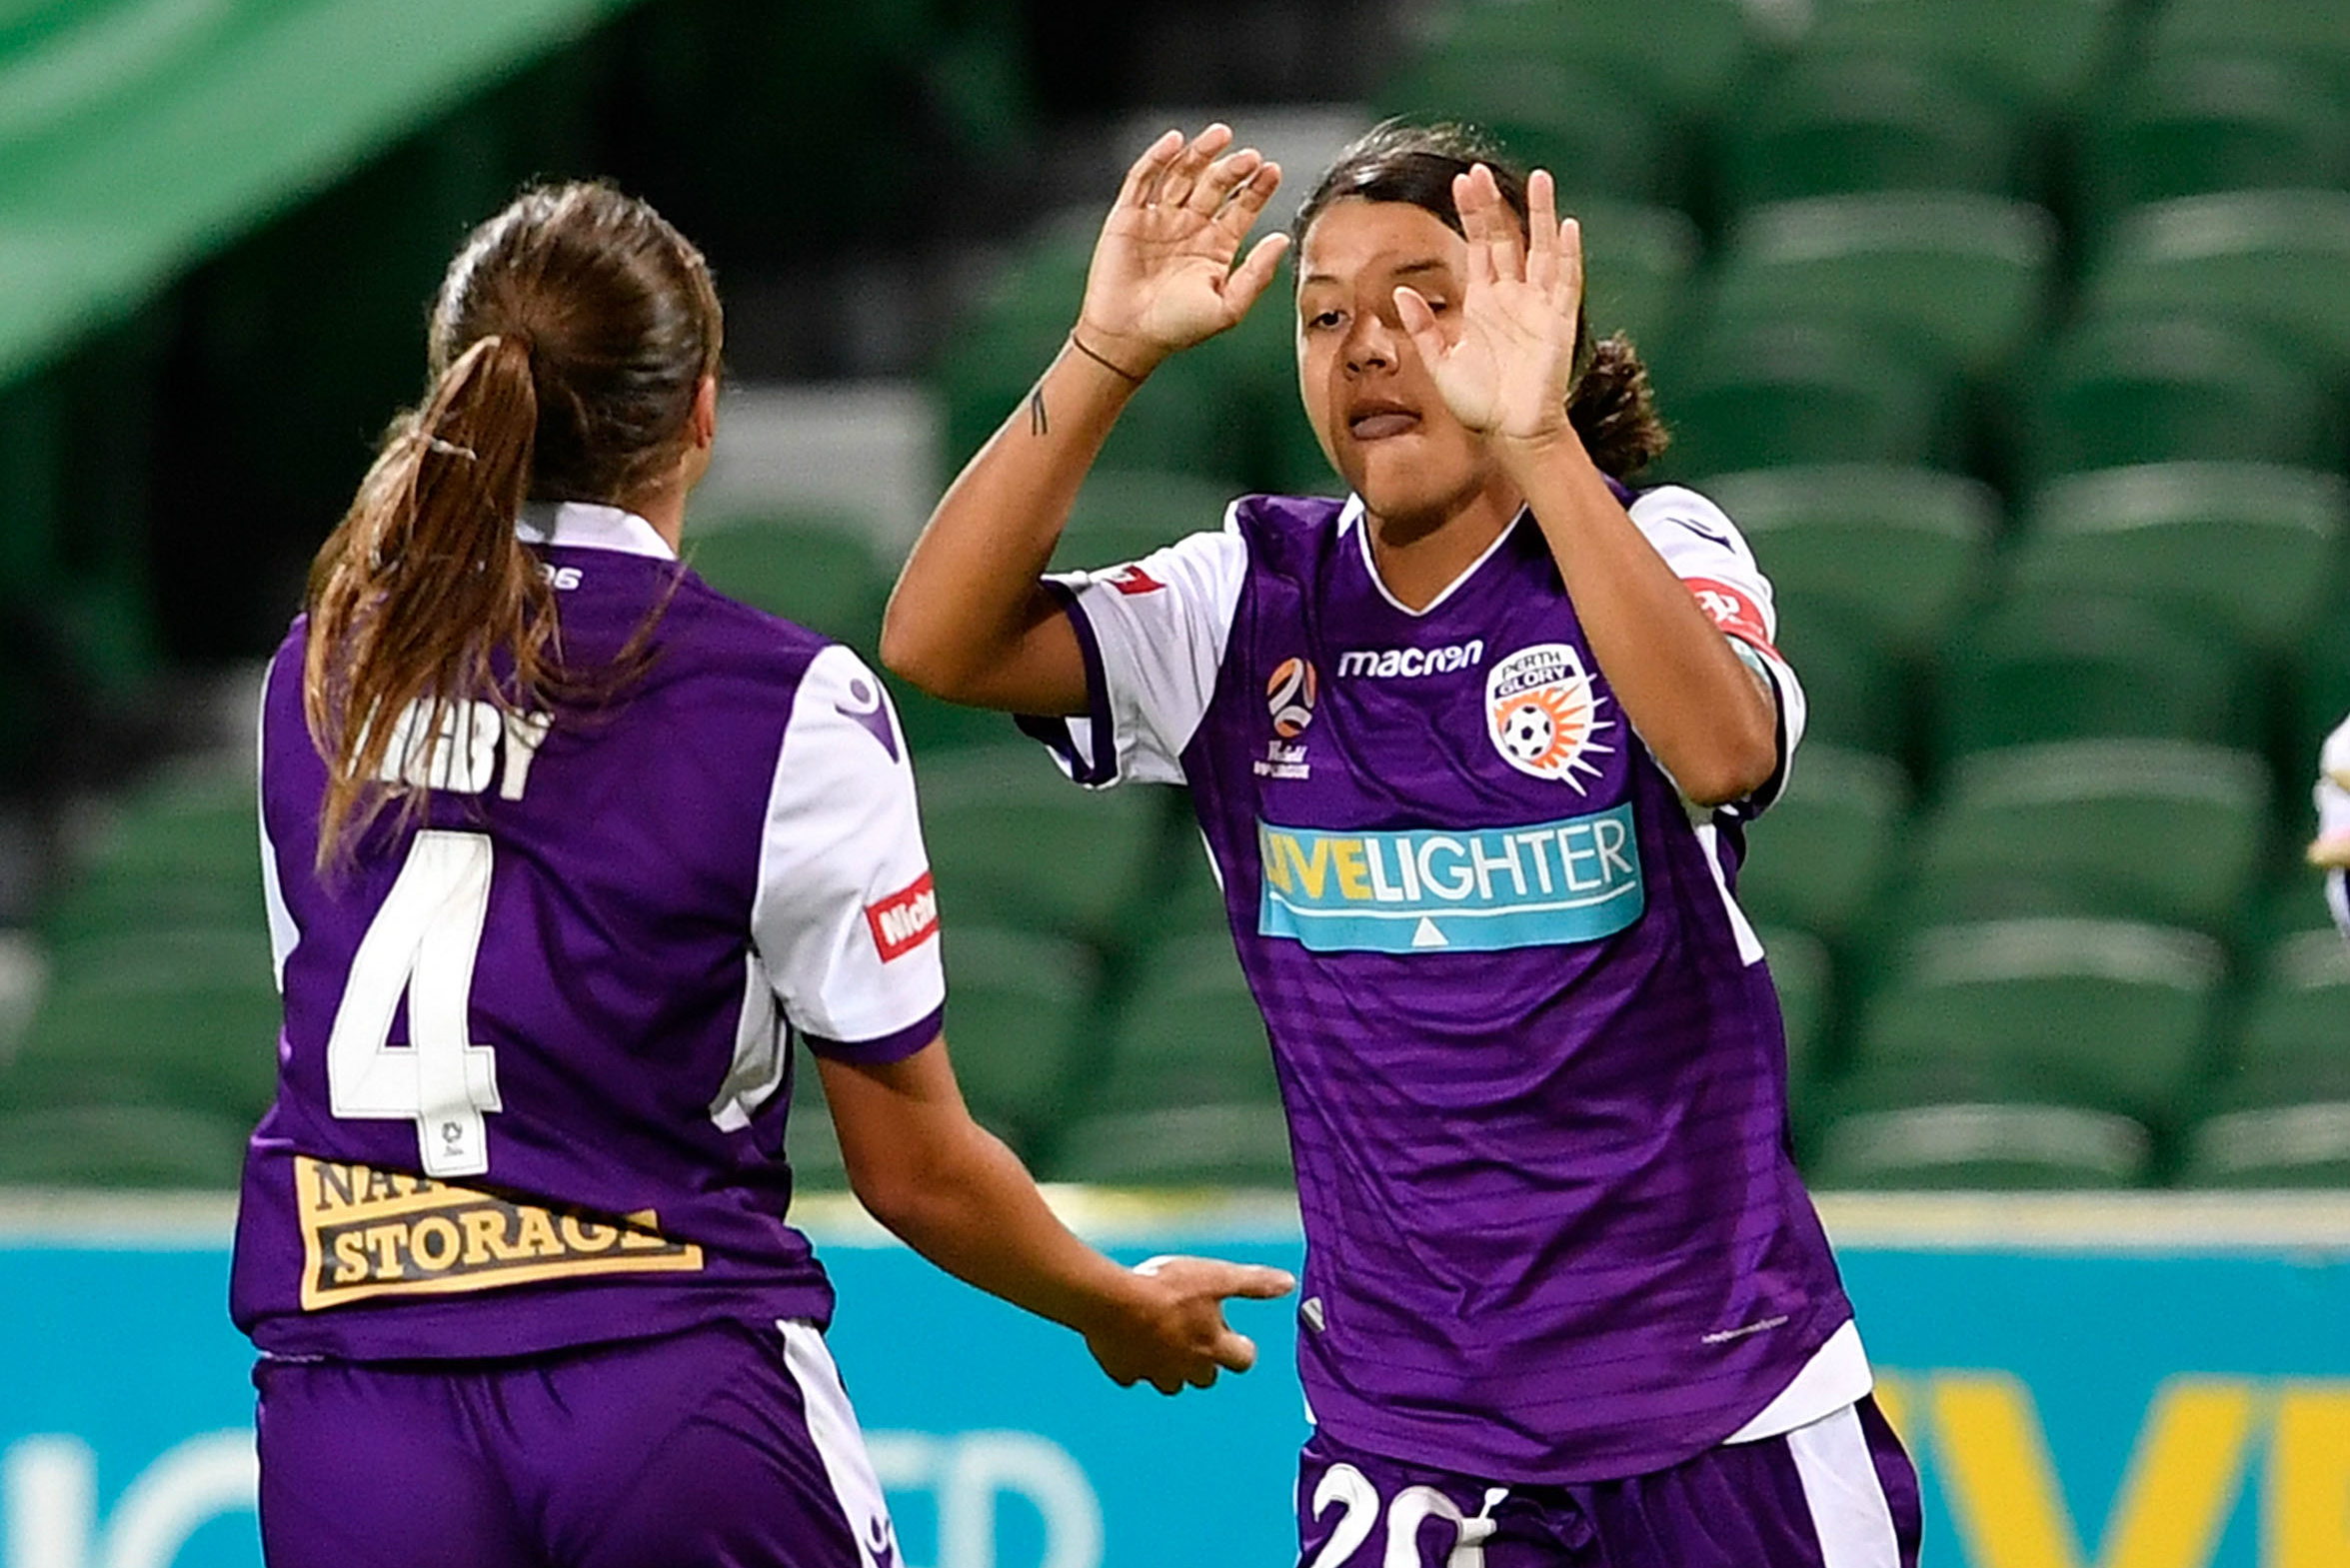 Sam Kerr celebrates one of her two goals against the Wanderers.